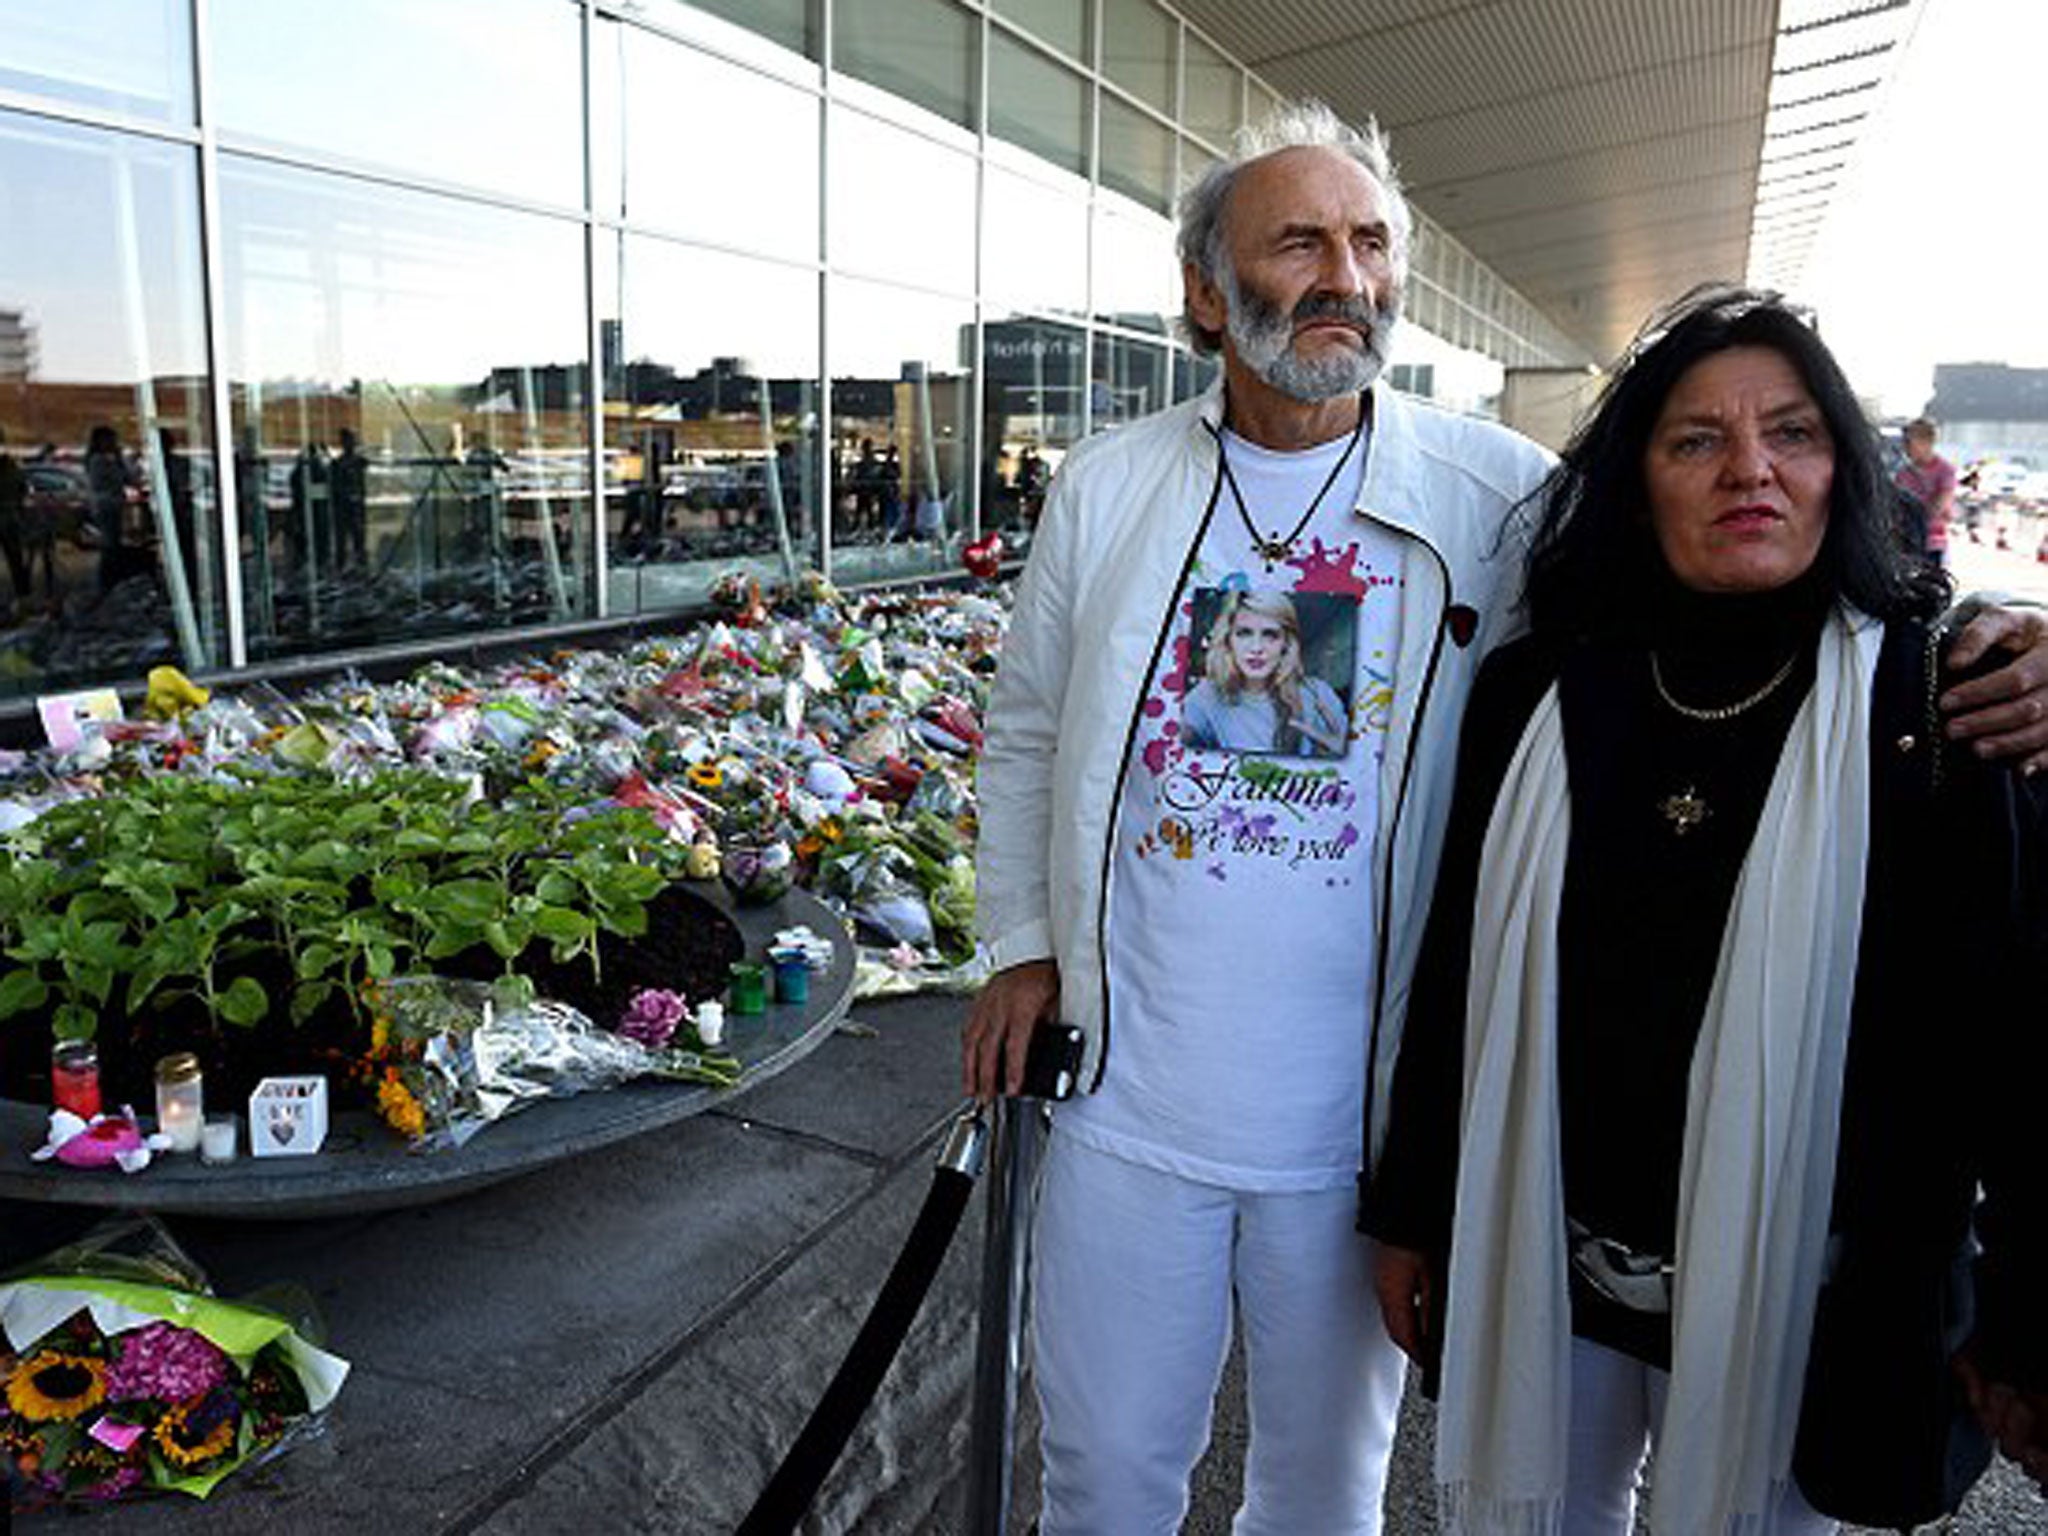 George and Angela Dyczynski the parents of 25-year-old only child Fatima Dyczynski stand outside the airport